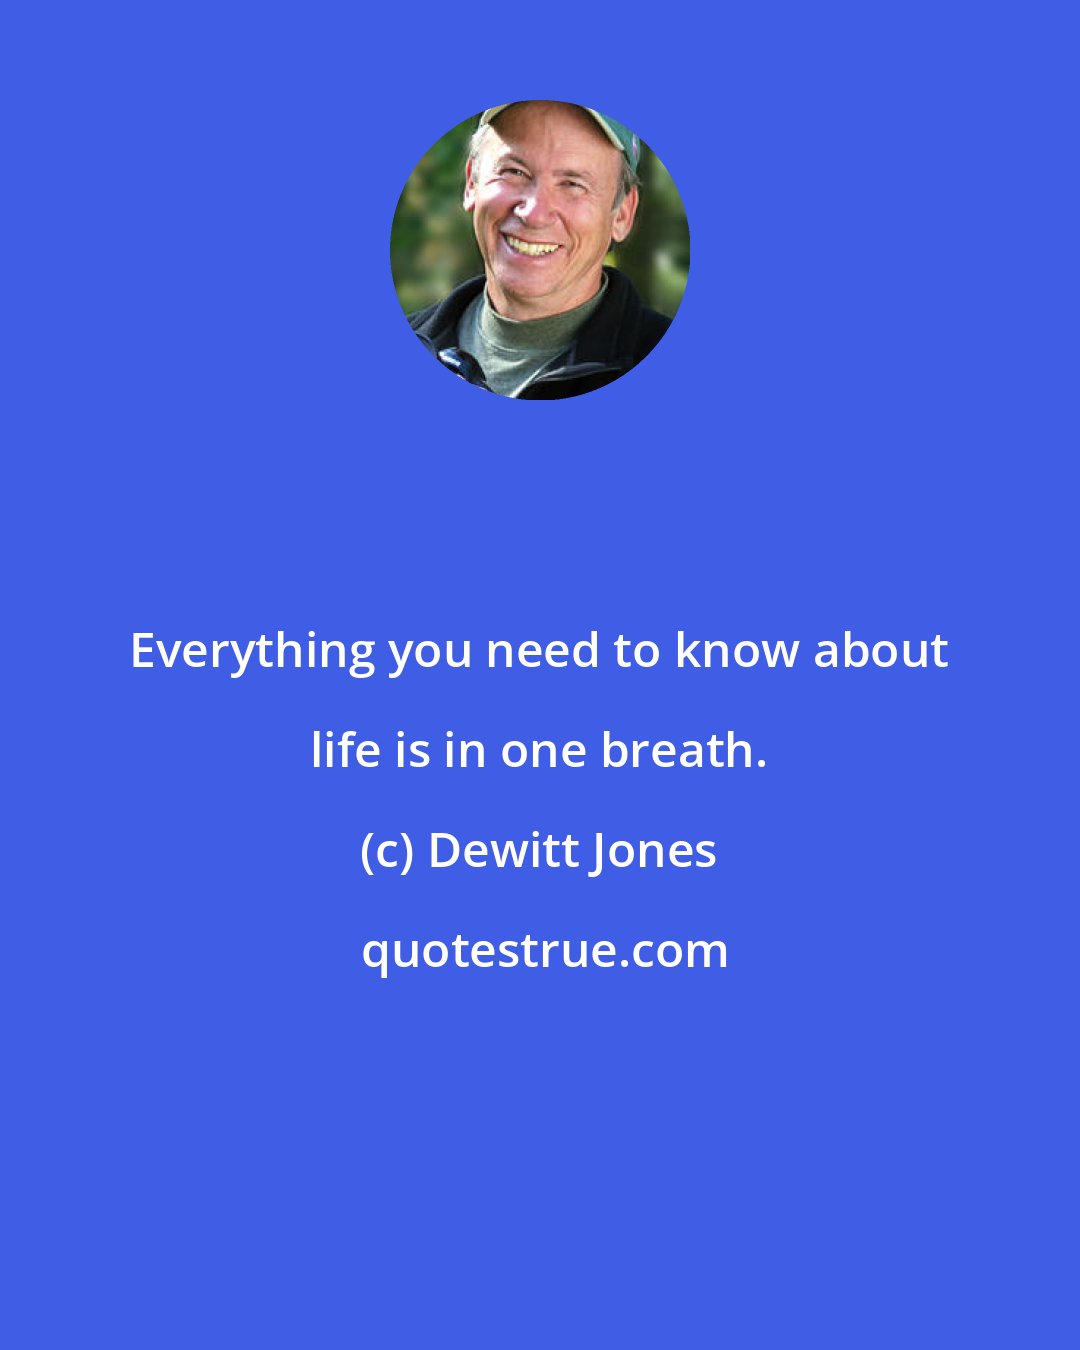 Dewitt Jones: Everything you need to know about life is in one breath.